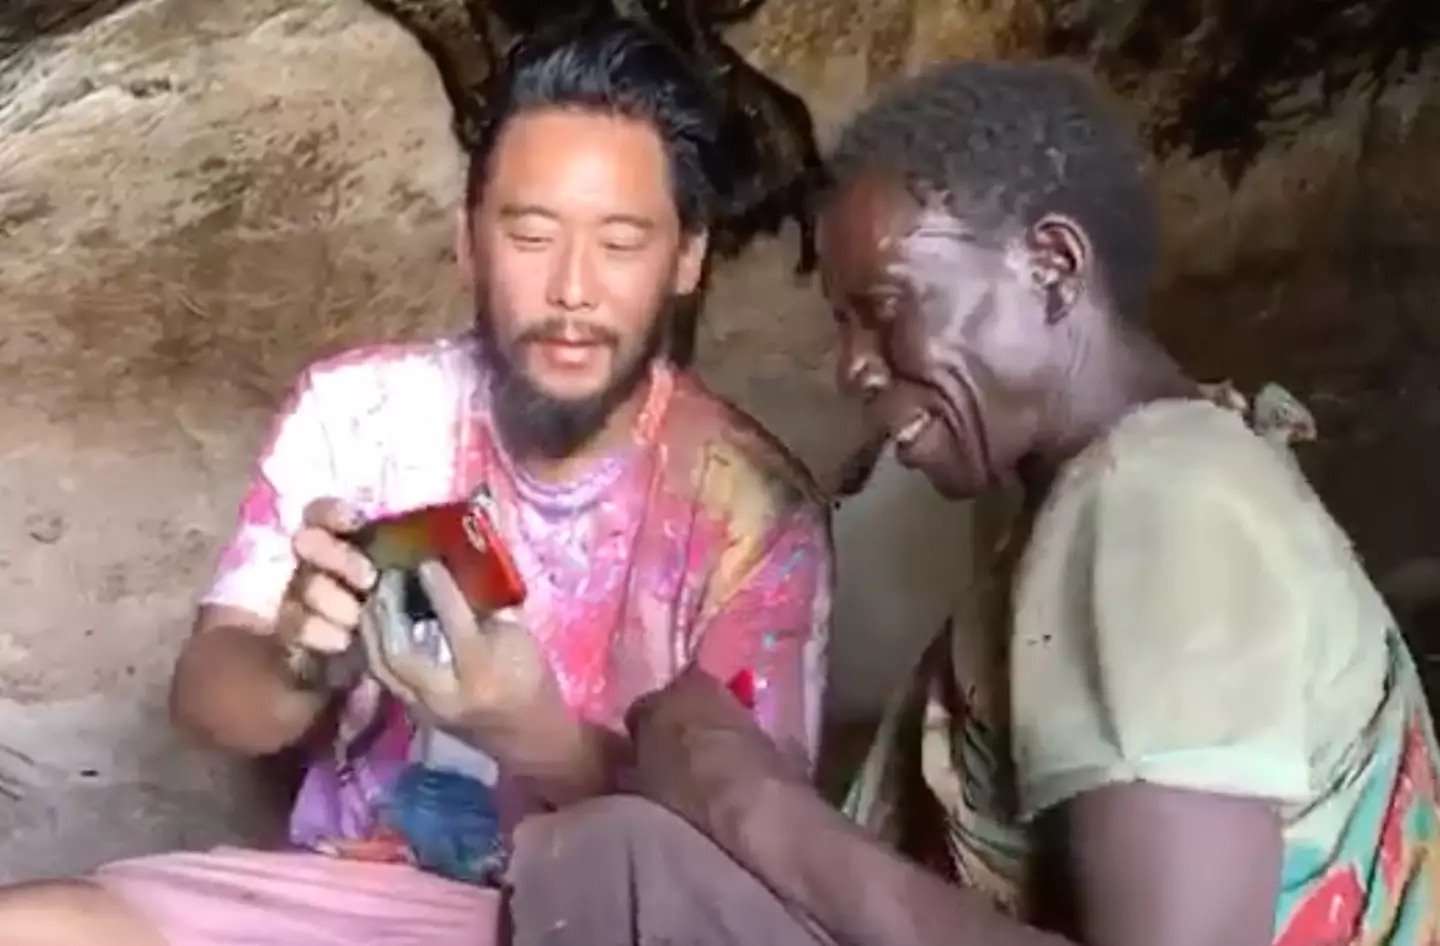 David Choe says living with the Hadza people was a 'life-changing' experience.